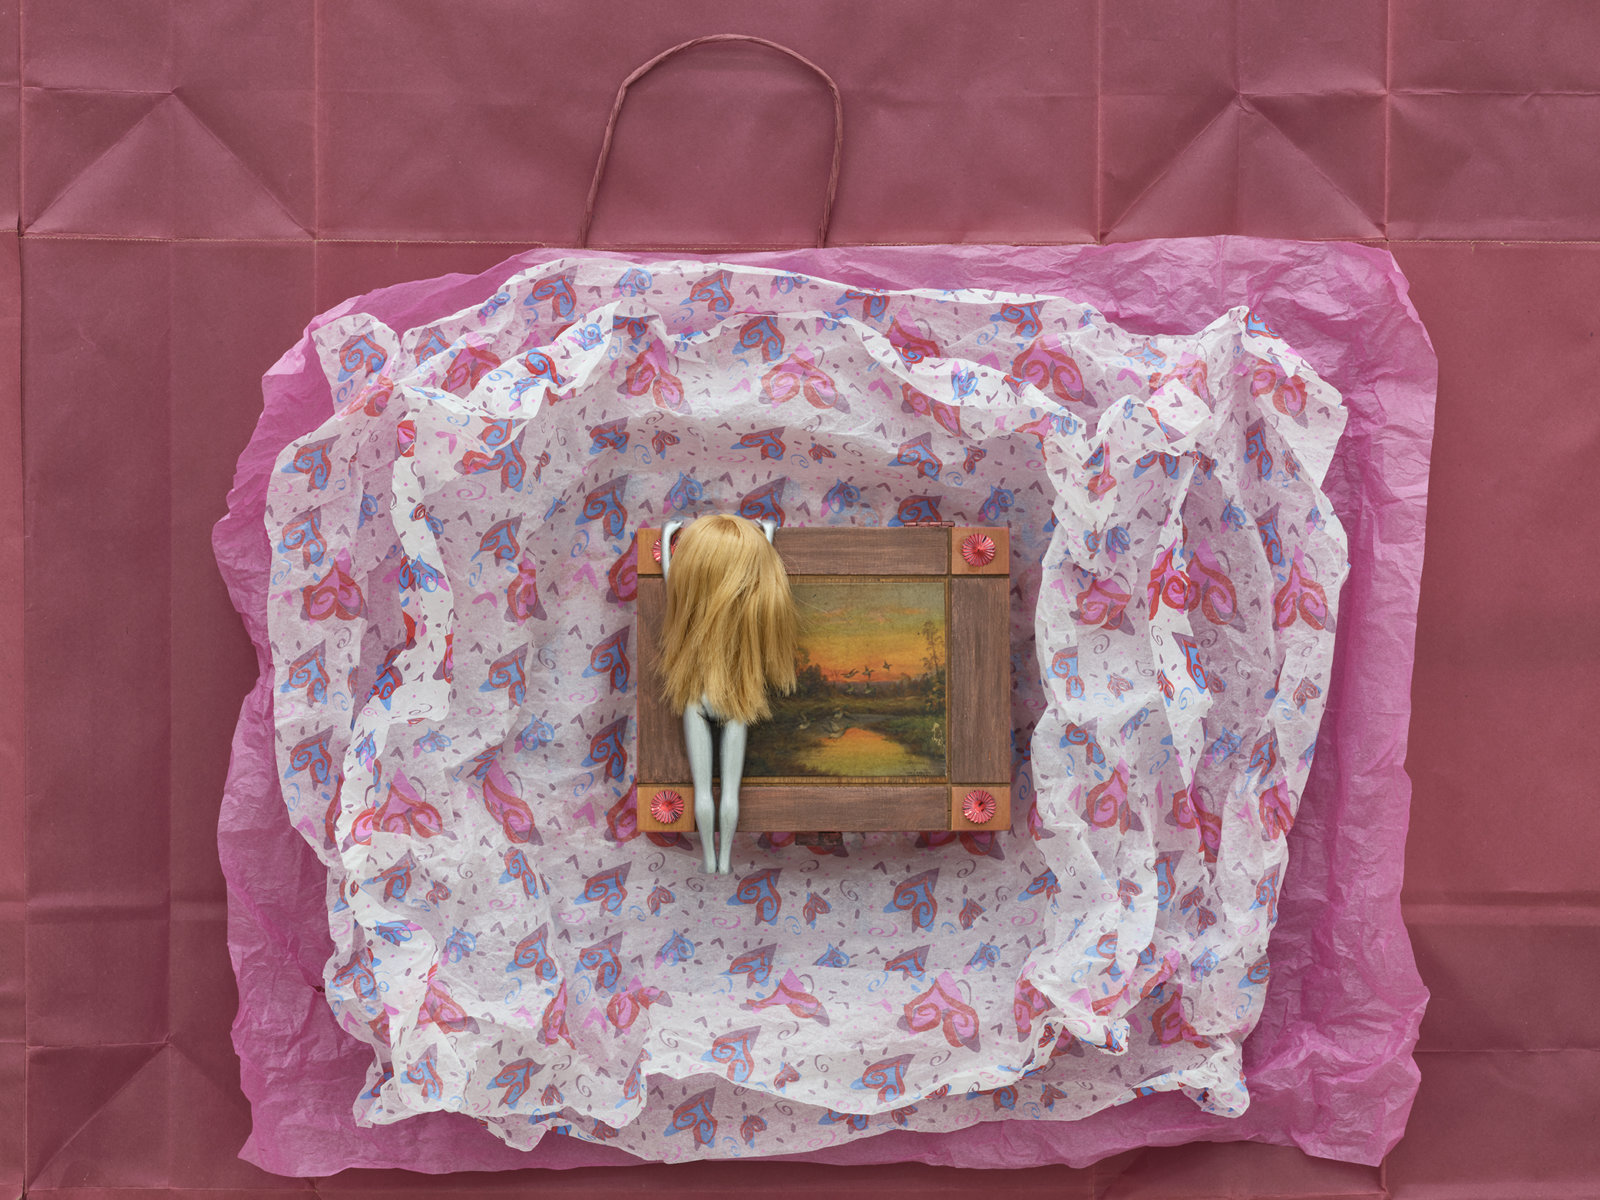 Liz Magor, Gateway (detail), 2020, painted doll, wooden box, packaging materials, 43 x 88 x 3 in. (109 x 222 x 8 cm)